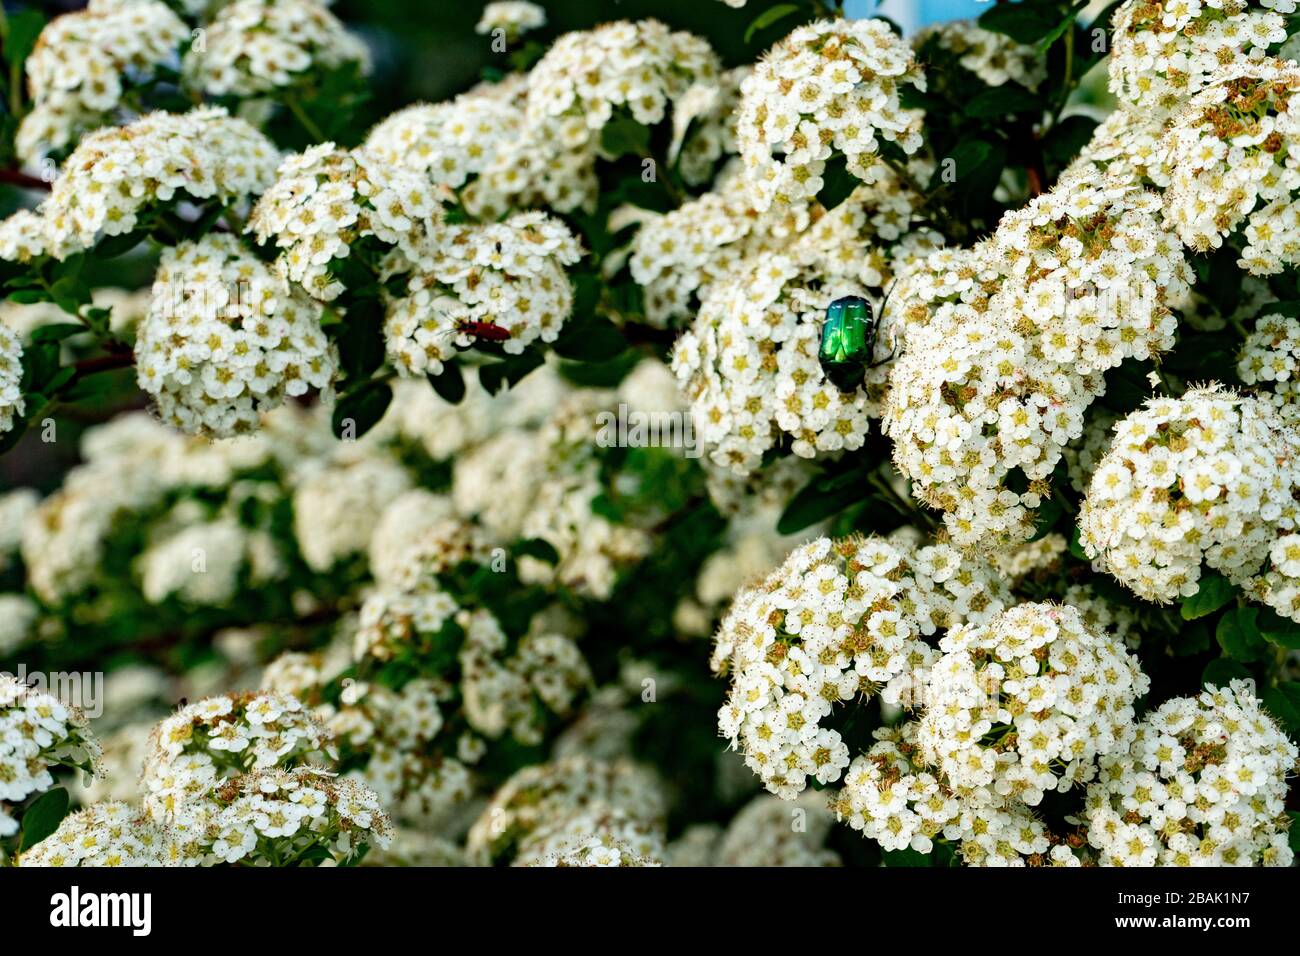 Blooming spirea or meadowsweet. Branches with white flowers. Beetle Eats Nectar Stock Photo